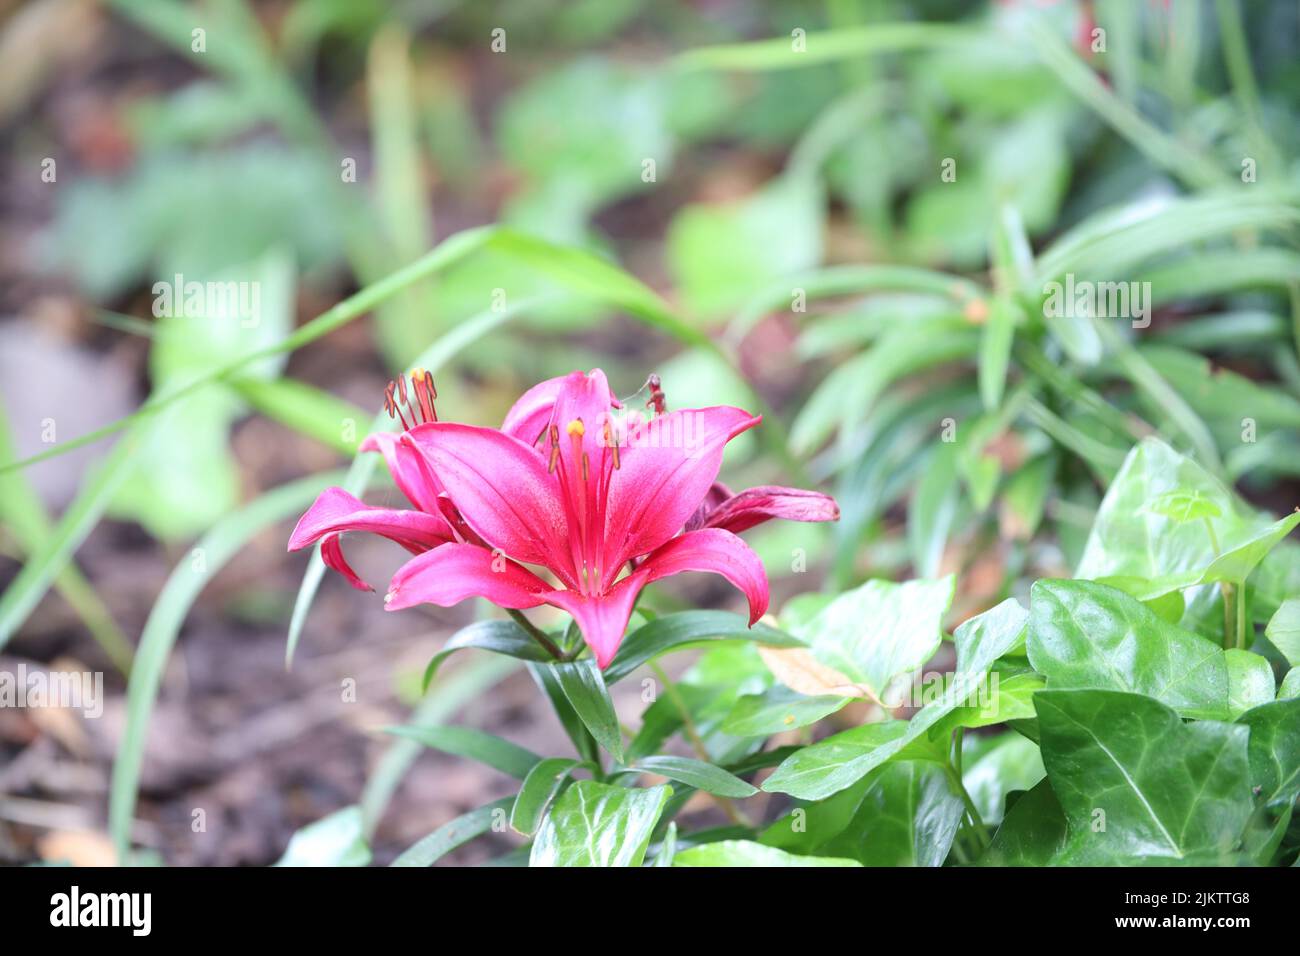 A shallow focus shot of a red Wood lily flower with green leaves in the garden Stock Photo